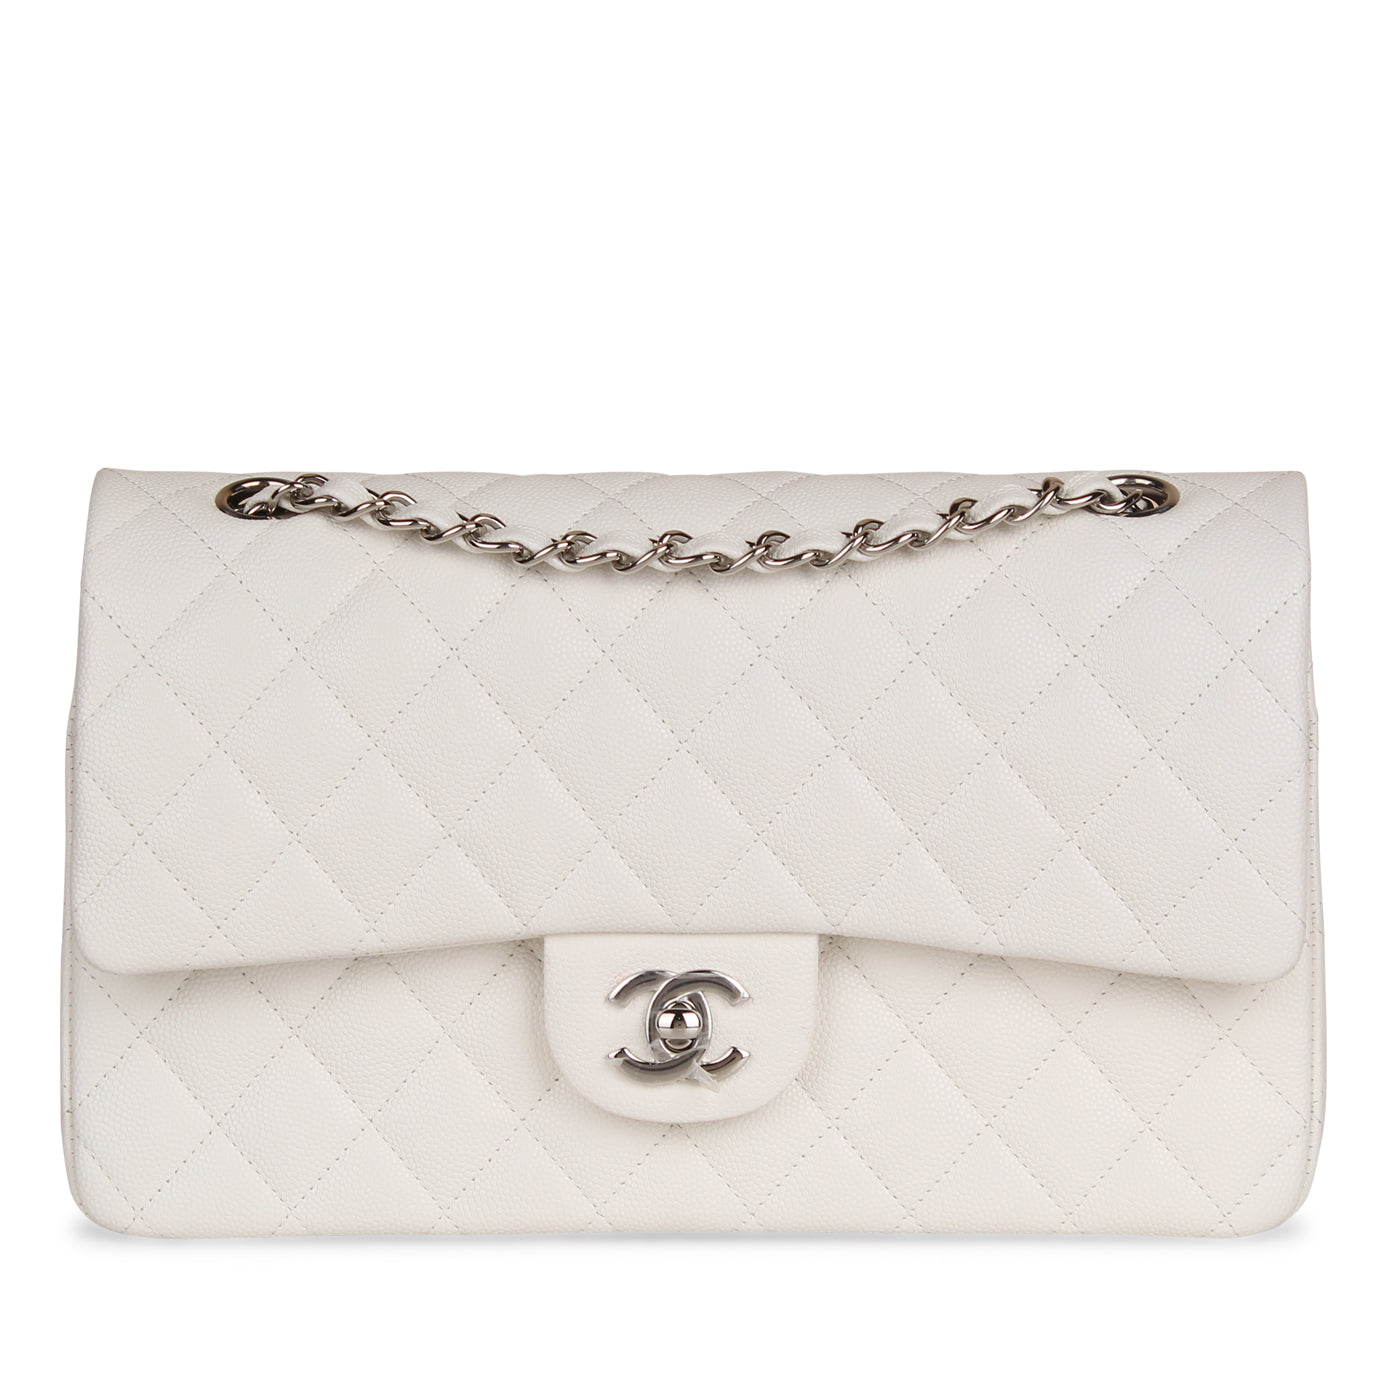 Chanel Cream White Quilted Caviar CC Pocket Small Flap Bag Enamel And Gold Hardware, 2017 (Very Good)